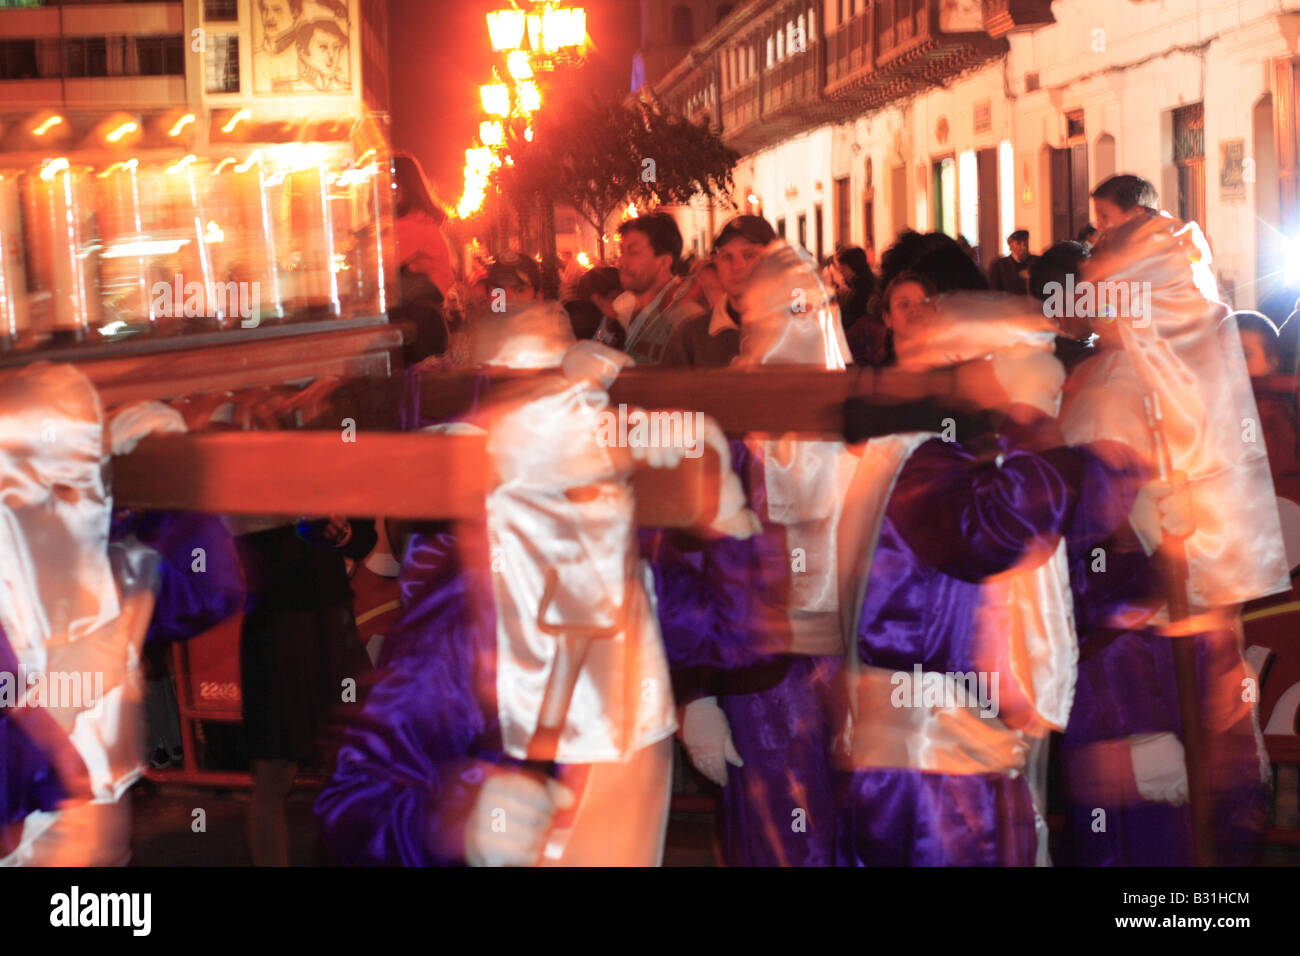 A group of masked men carrying a sacred image during a catholic procession, Tunja, Boyacá, Colombia, South America Stock Photo